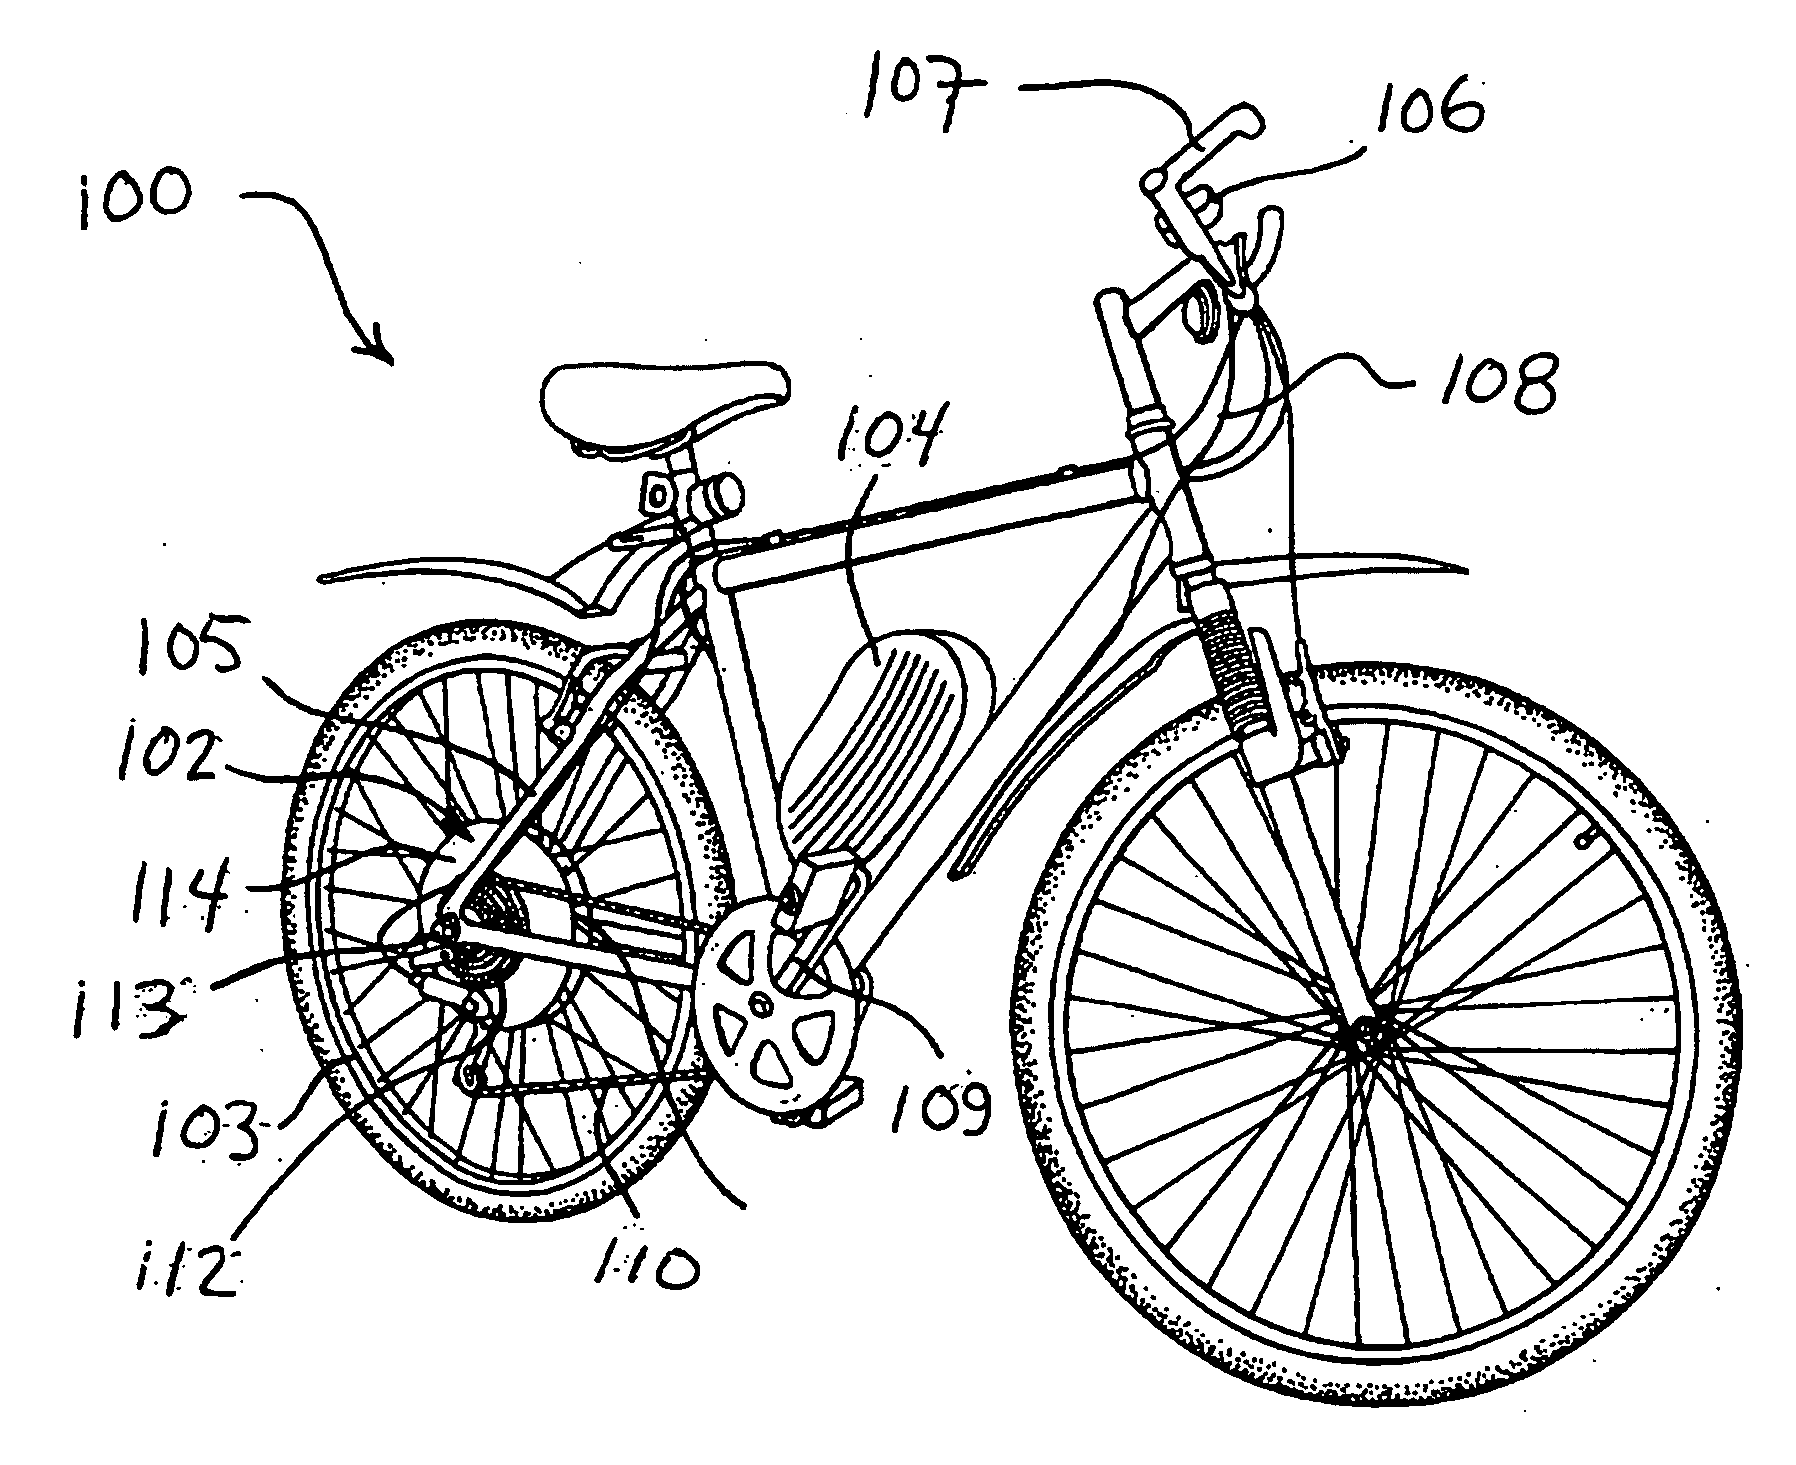 Energy Management System for Motor-Assisted User-Propelled Vehicles